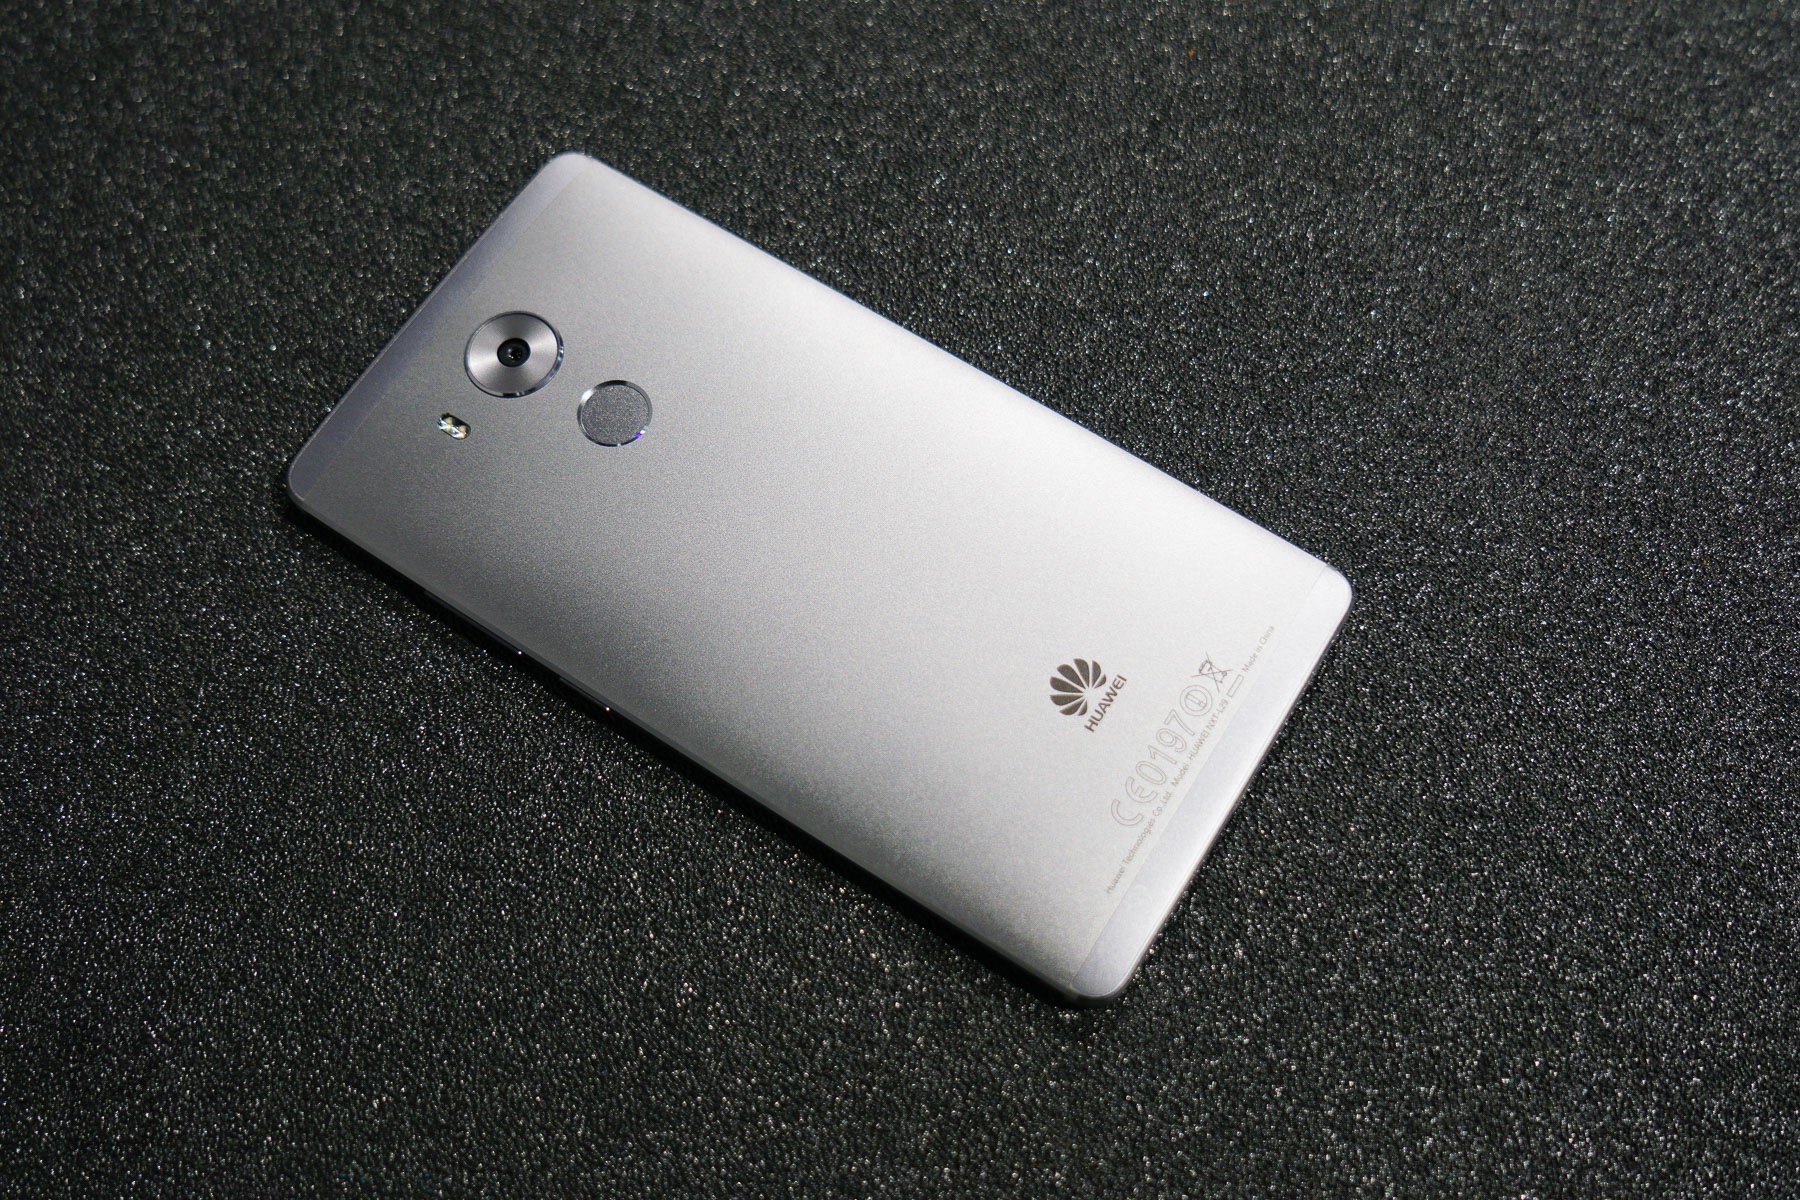 The New Style of Business with Huawei Mate 8